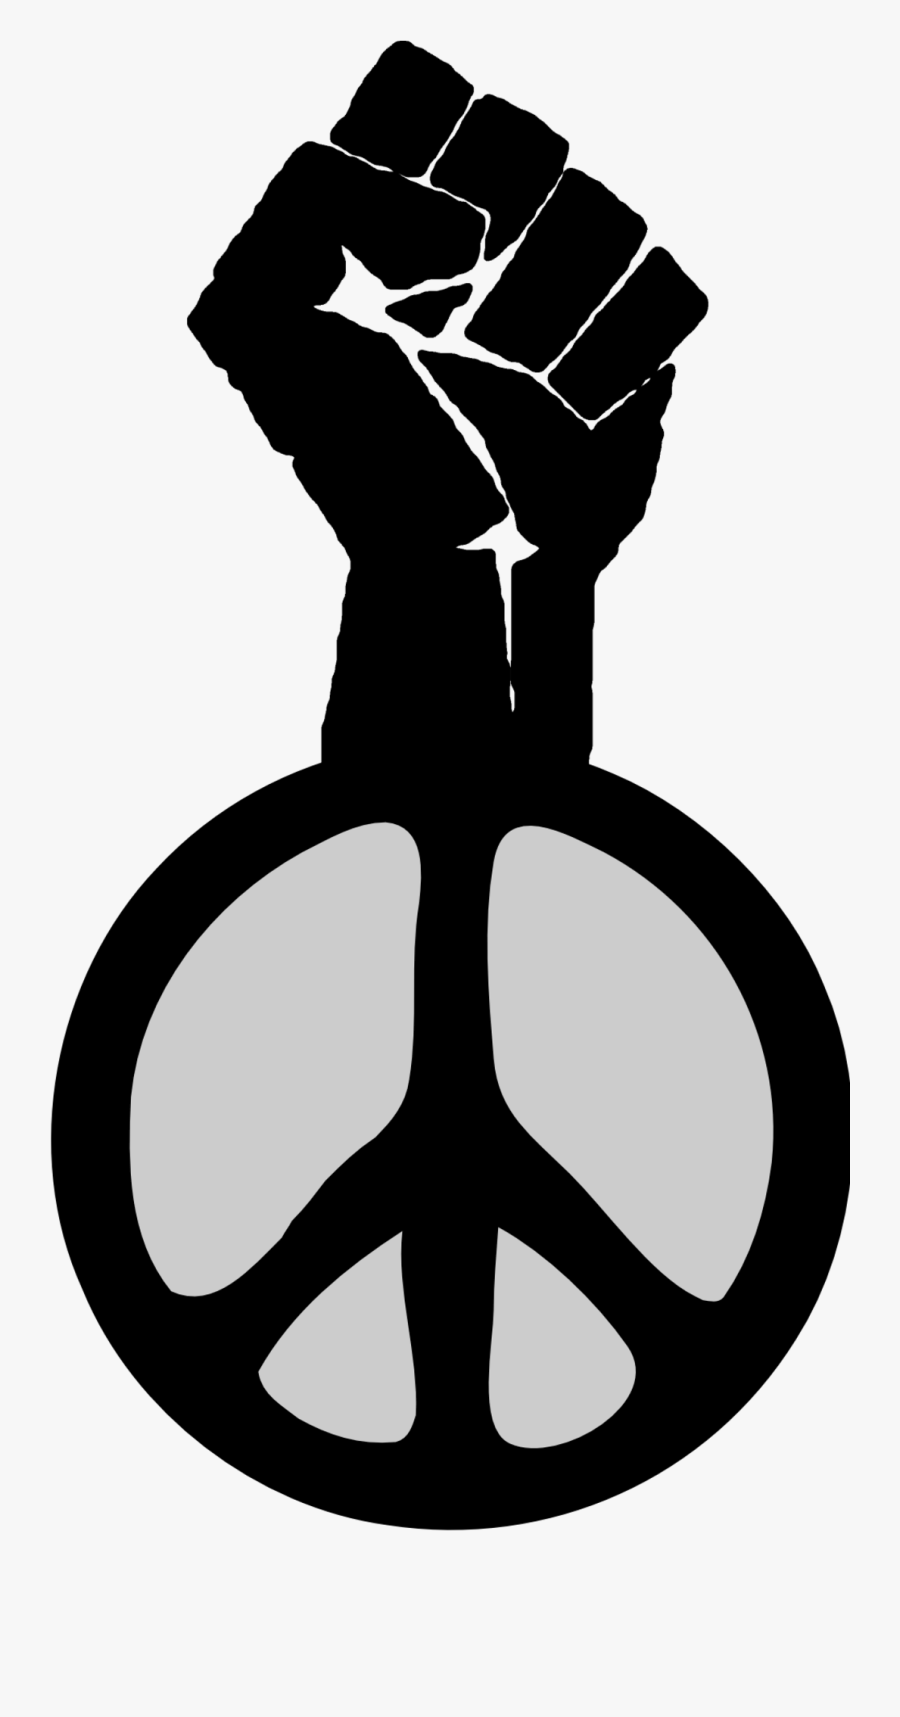 Stand Up Lift Your - Black Power Fist Peace, Transparent Clipart